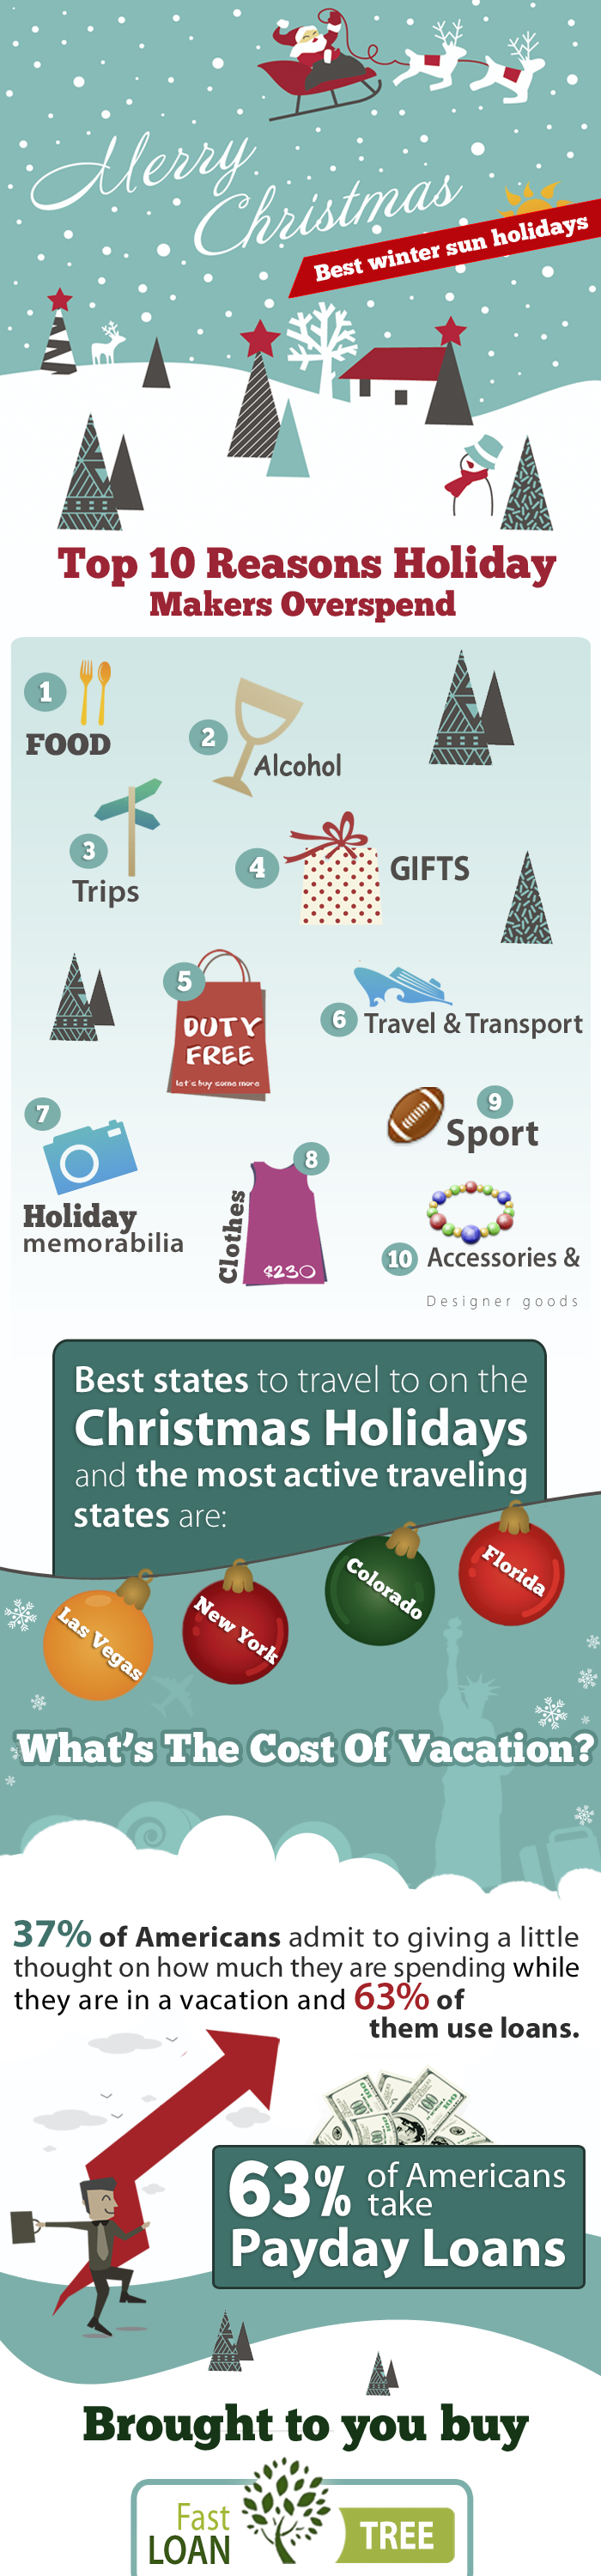 Top 10 Reasons holiday makers overspend Infographic